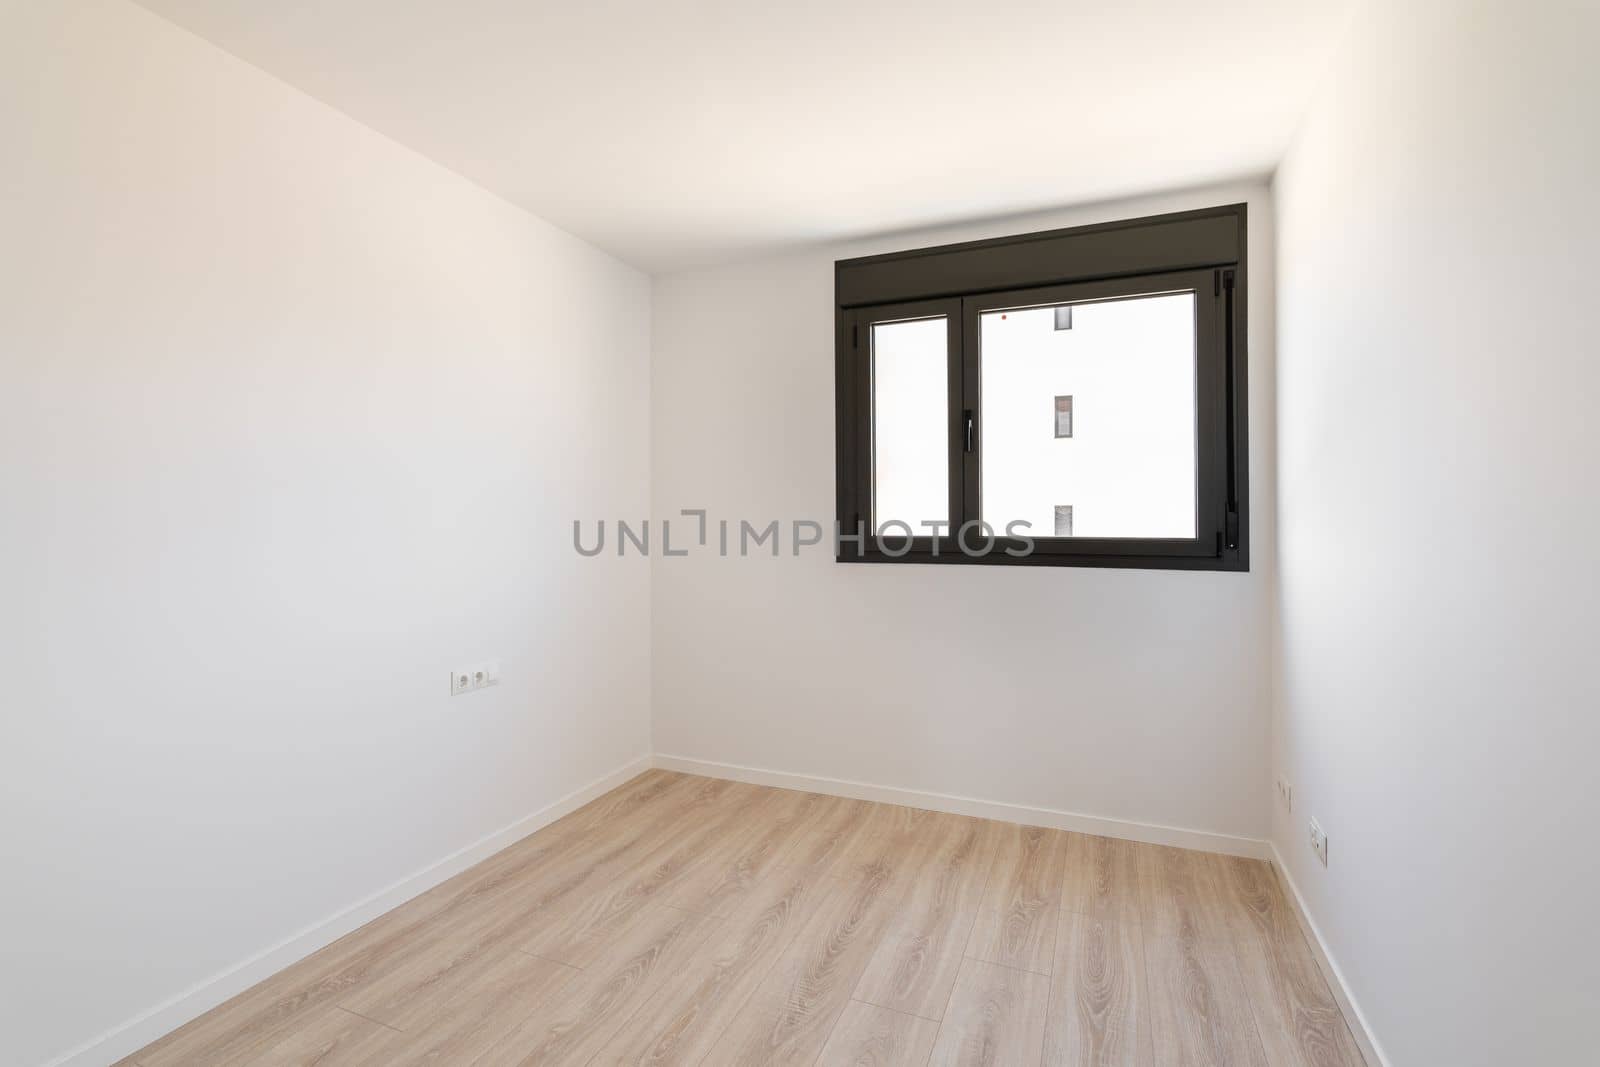 Small empty room without furniture. The floor is new light wood laminate. A window made of black plastic for airing the room. Daylight enters through the frosted glass in the window. by apavlin